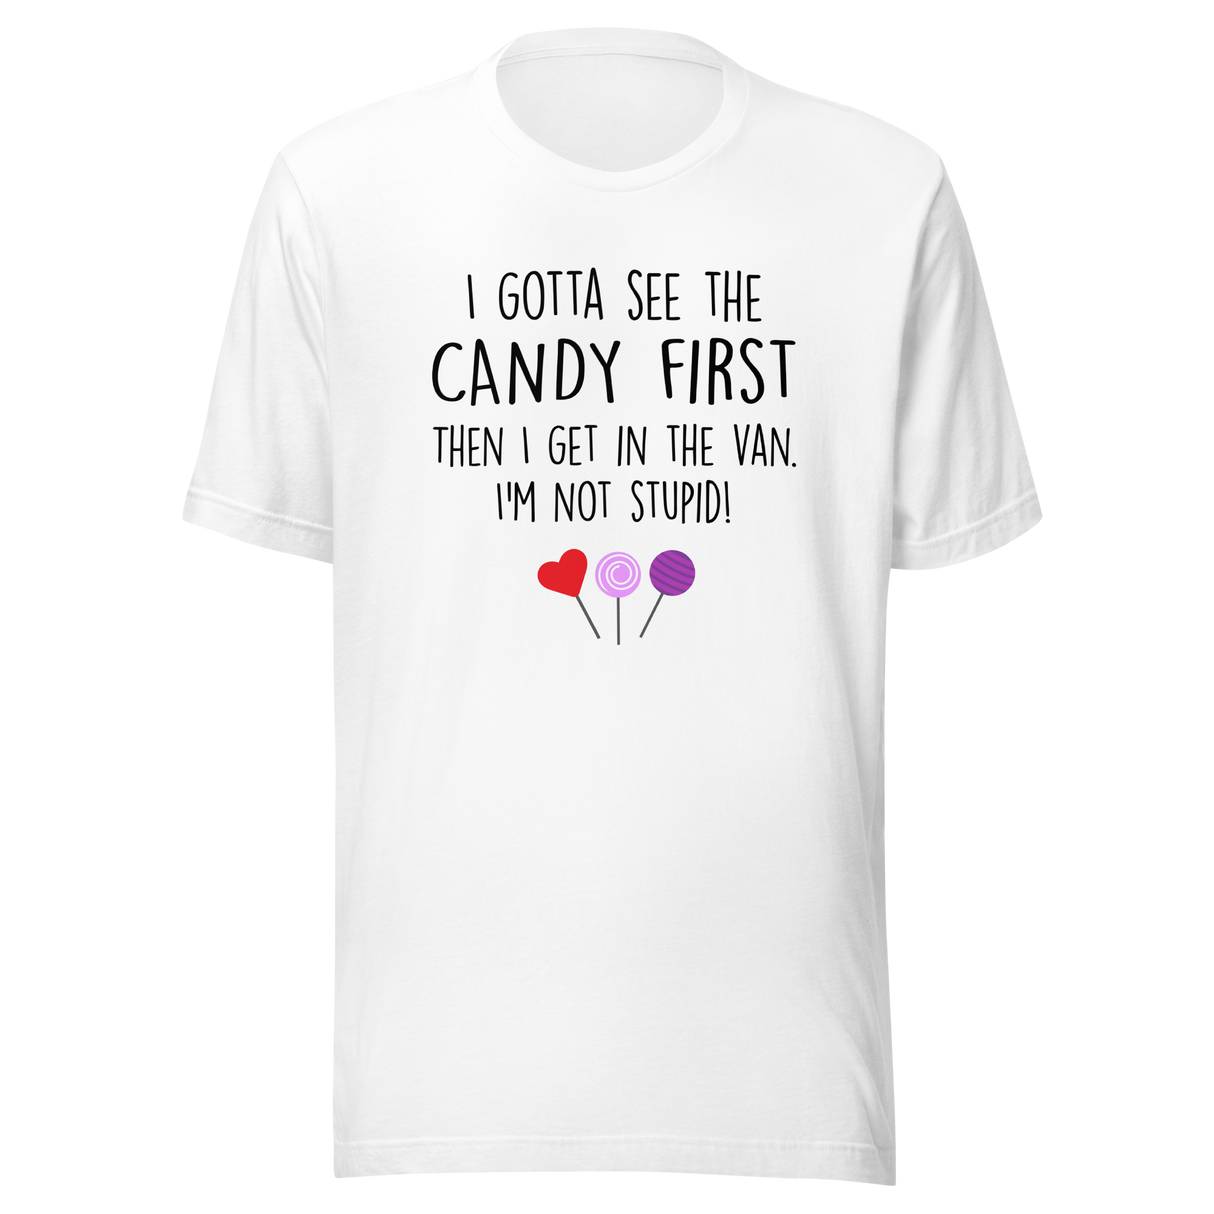 i-gotta-see-the-candy-first-then-i-get-in-the-van-im-not-stupid-funny-tee-candy-t-shirt-van-tee-t-shirt-tee#color_white